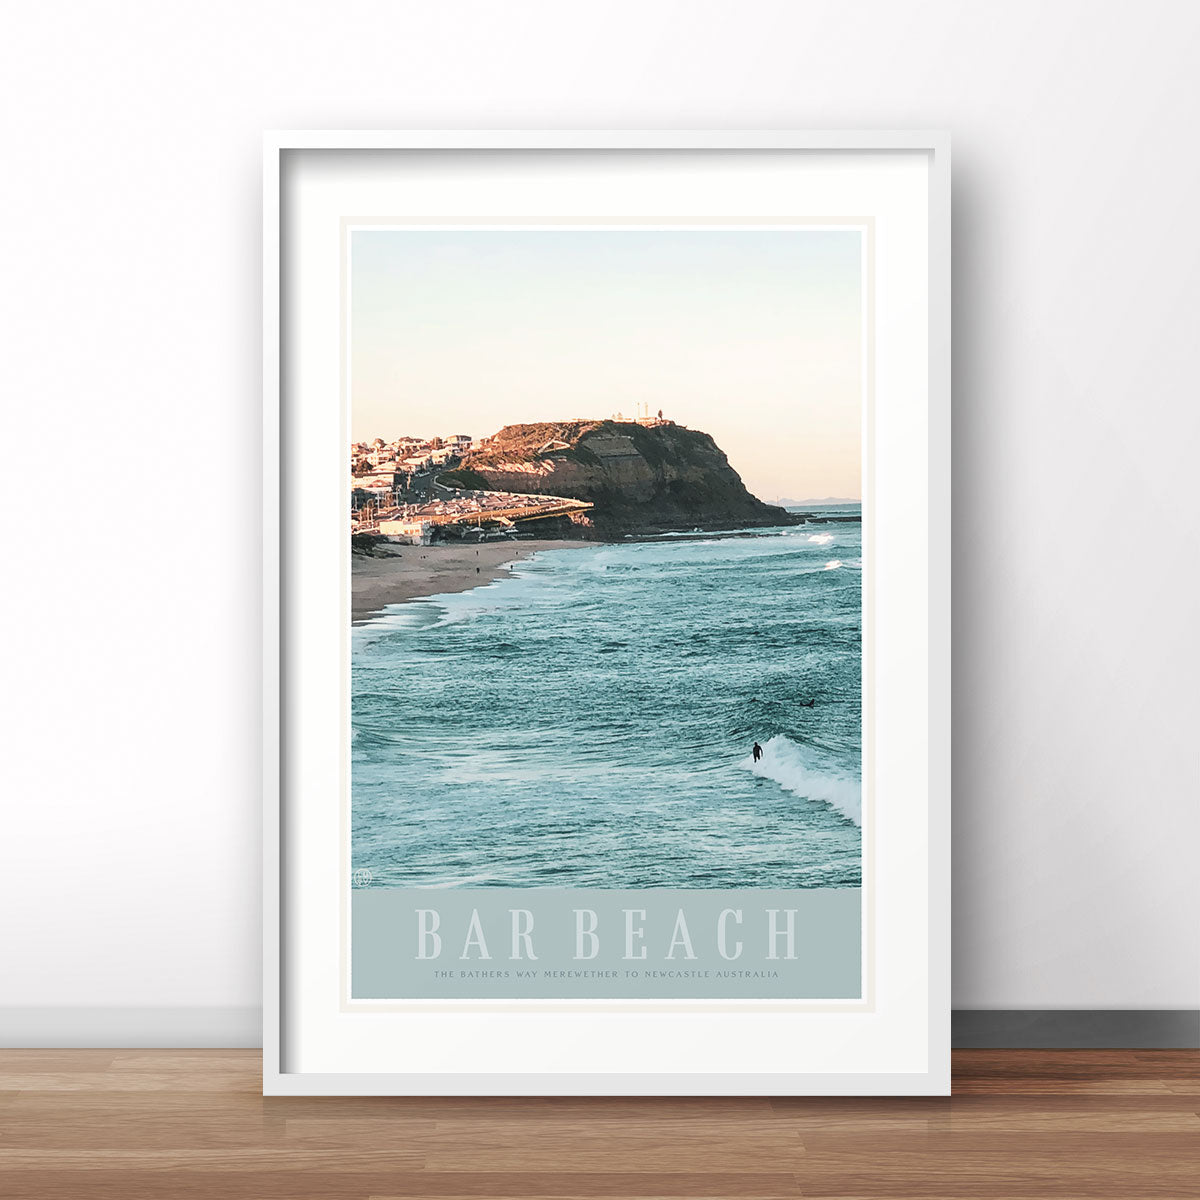 Bar Beach Newcastle vintage retro poster print from Places We Luv